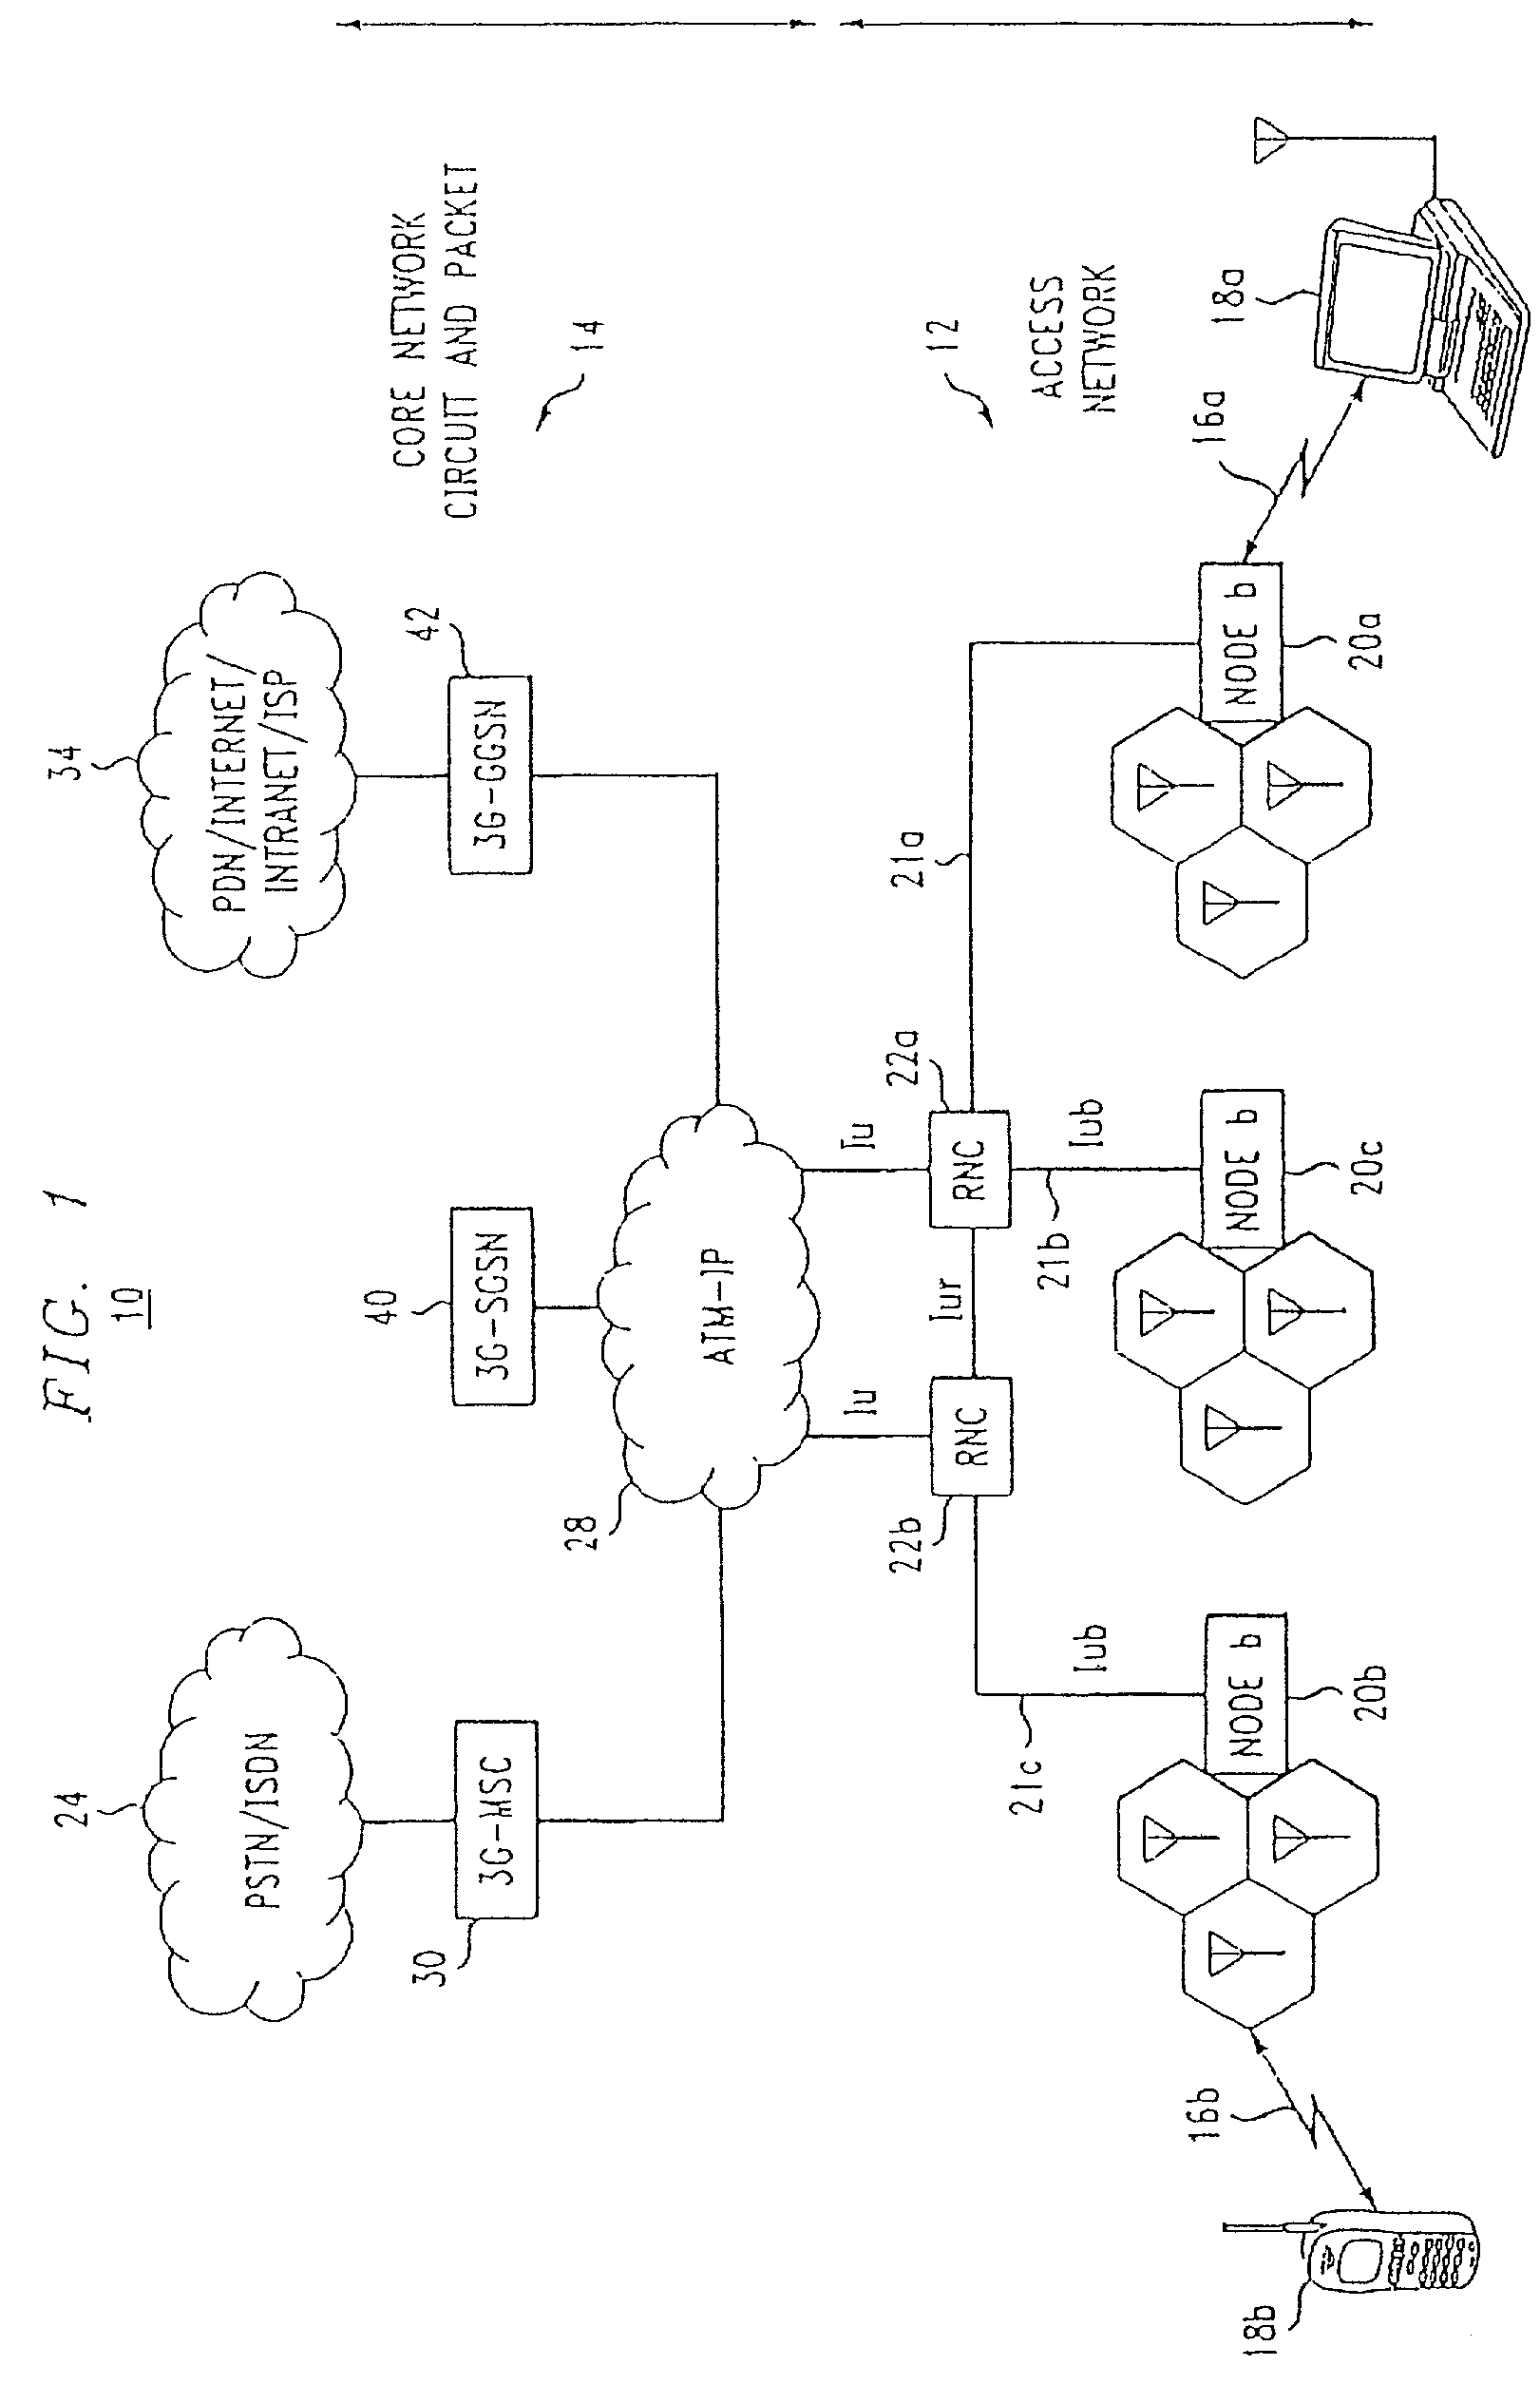 Protocol message compression in a wireless communications system